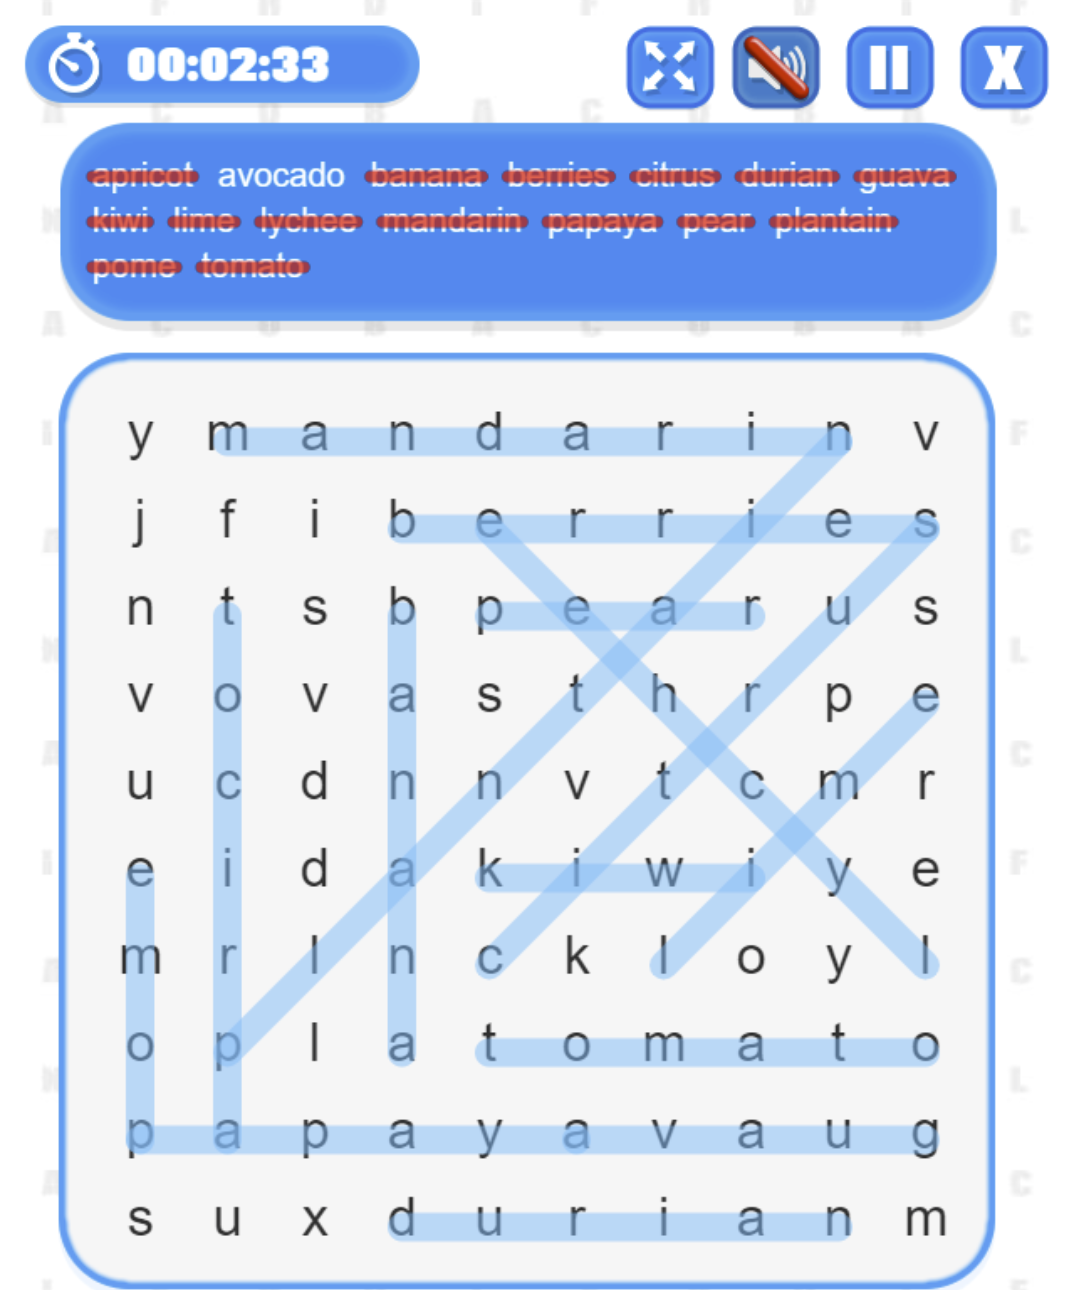 word-search-pictures-word-letters-answer-pope-priest-answers